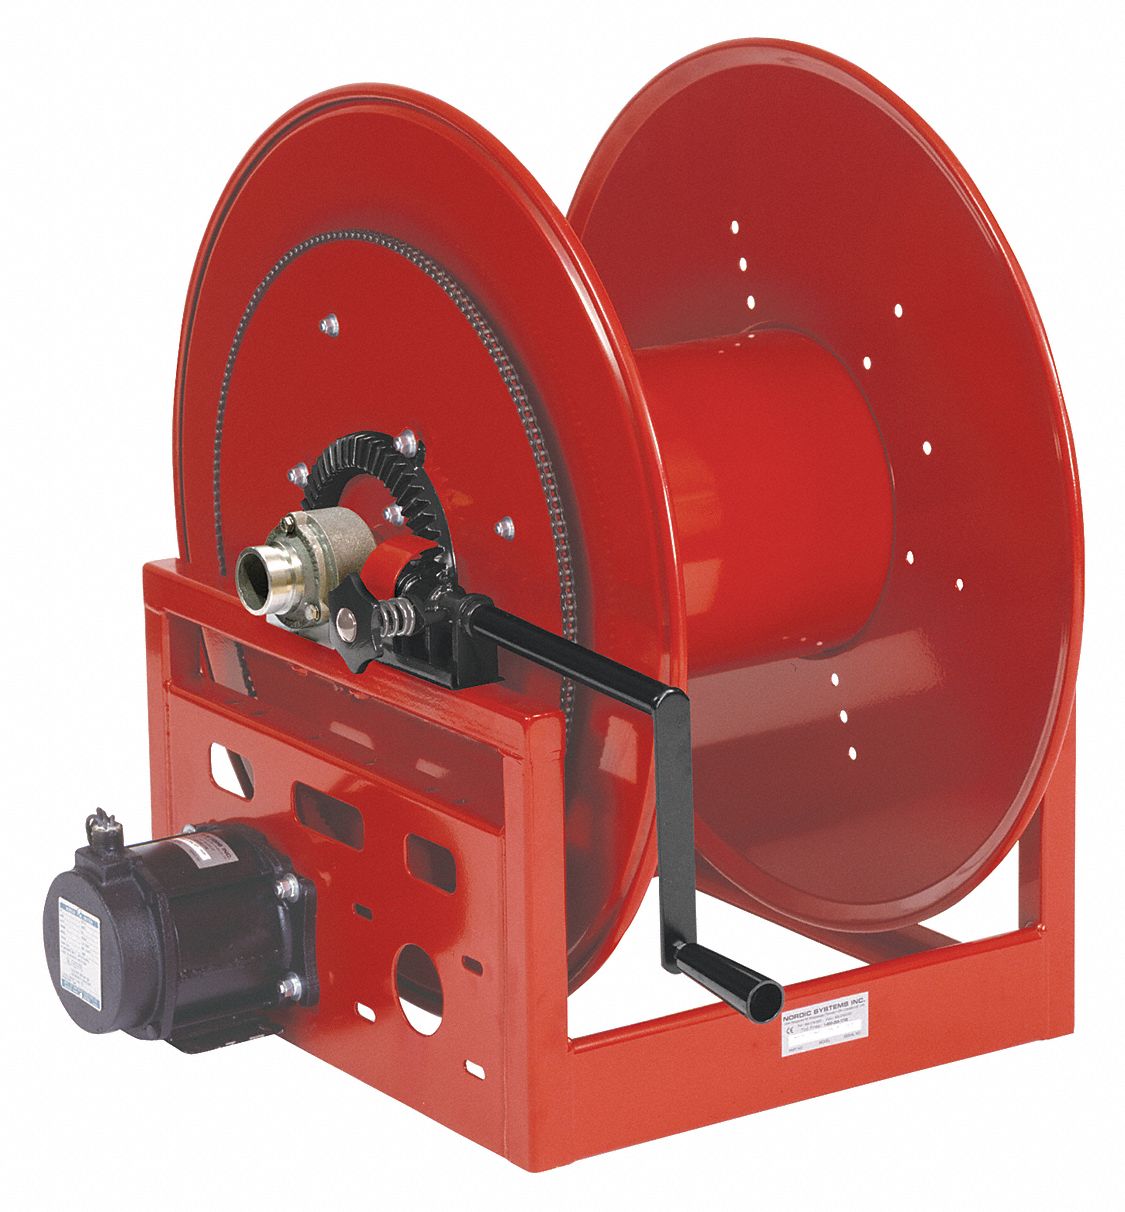 REELCRAFT 100 ft. Heavy Duty, Industrial Hose Reel, Red   Motor Driven and Hand Crank Hose Reels   38EE50|EP3905 25 24 15FF 1